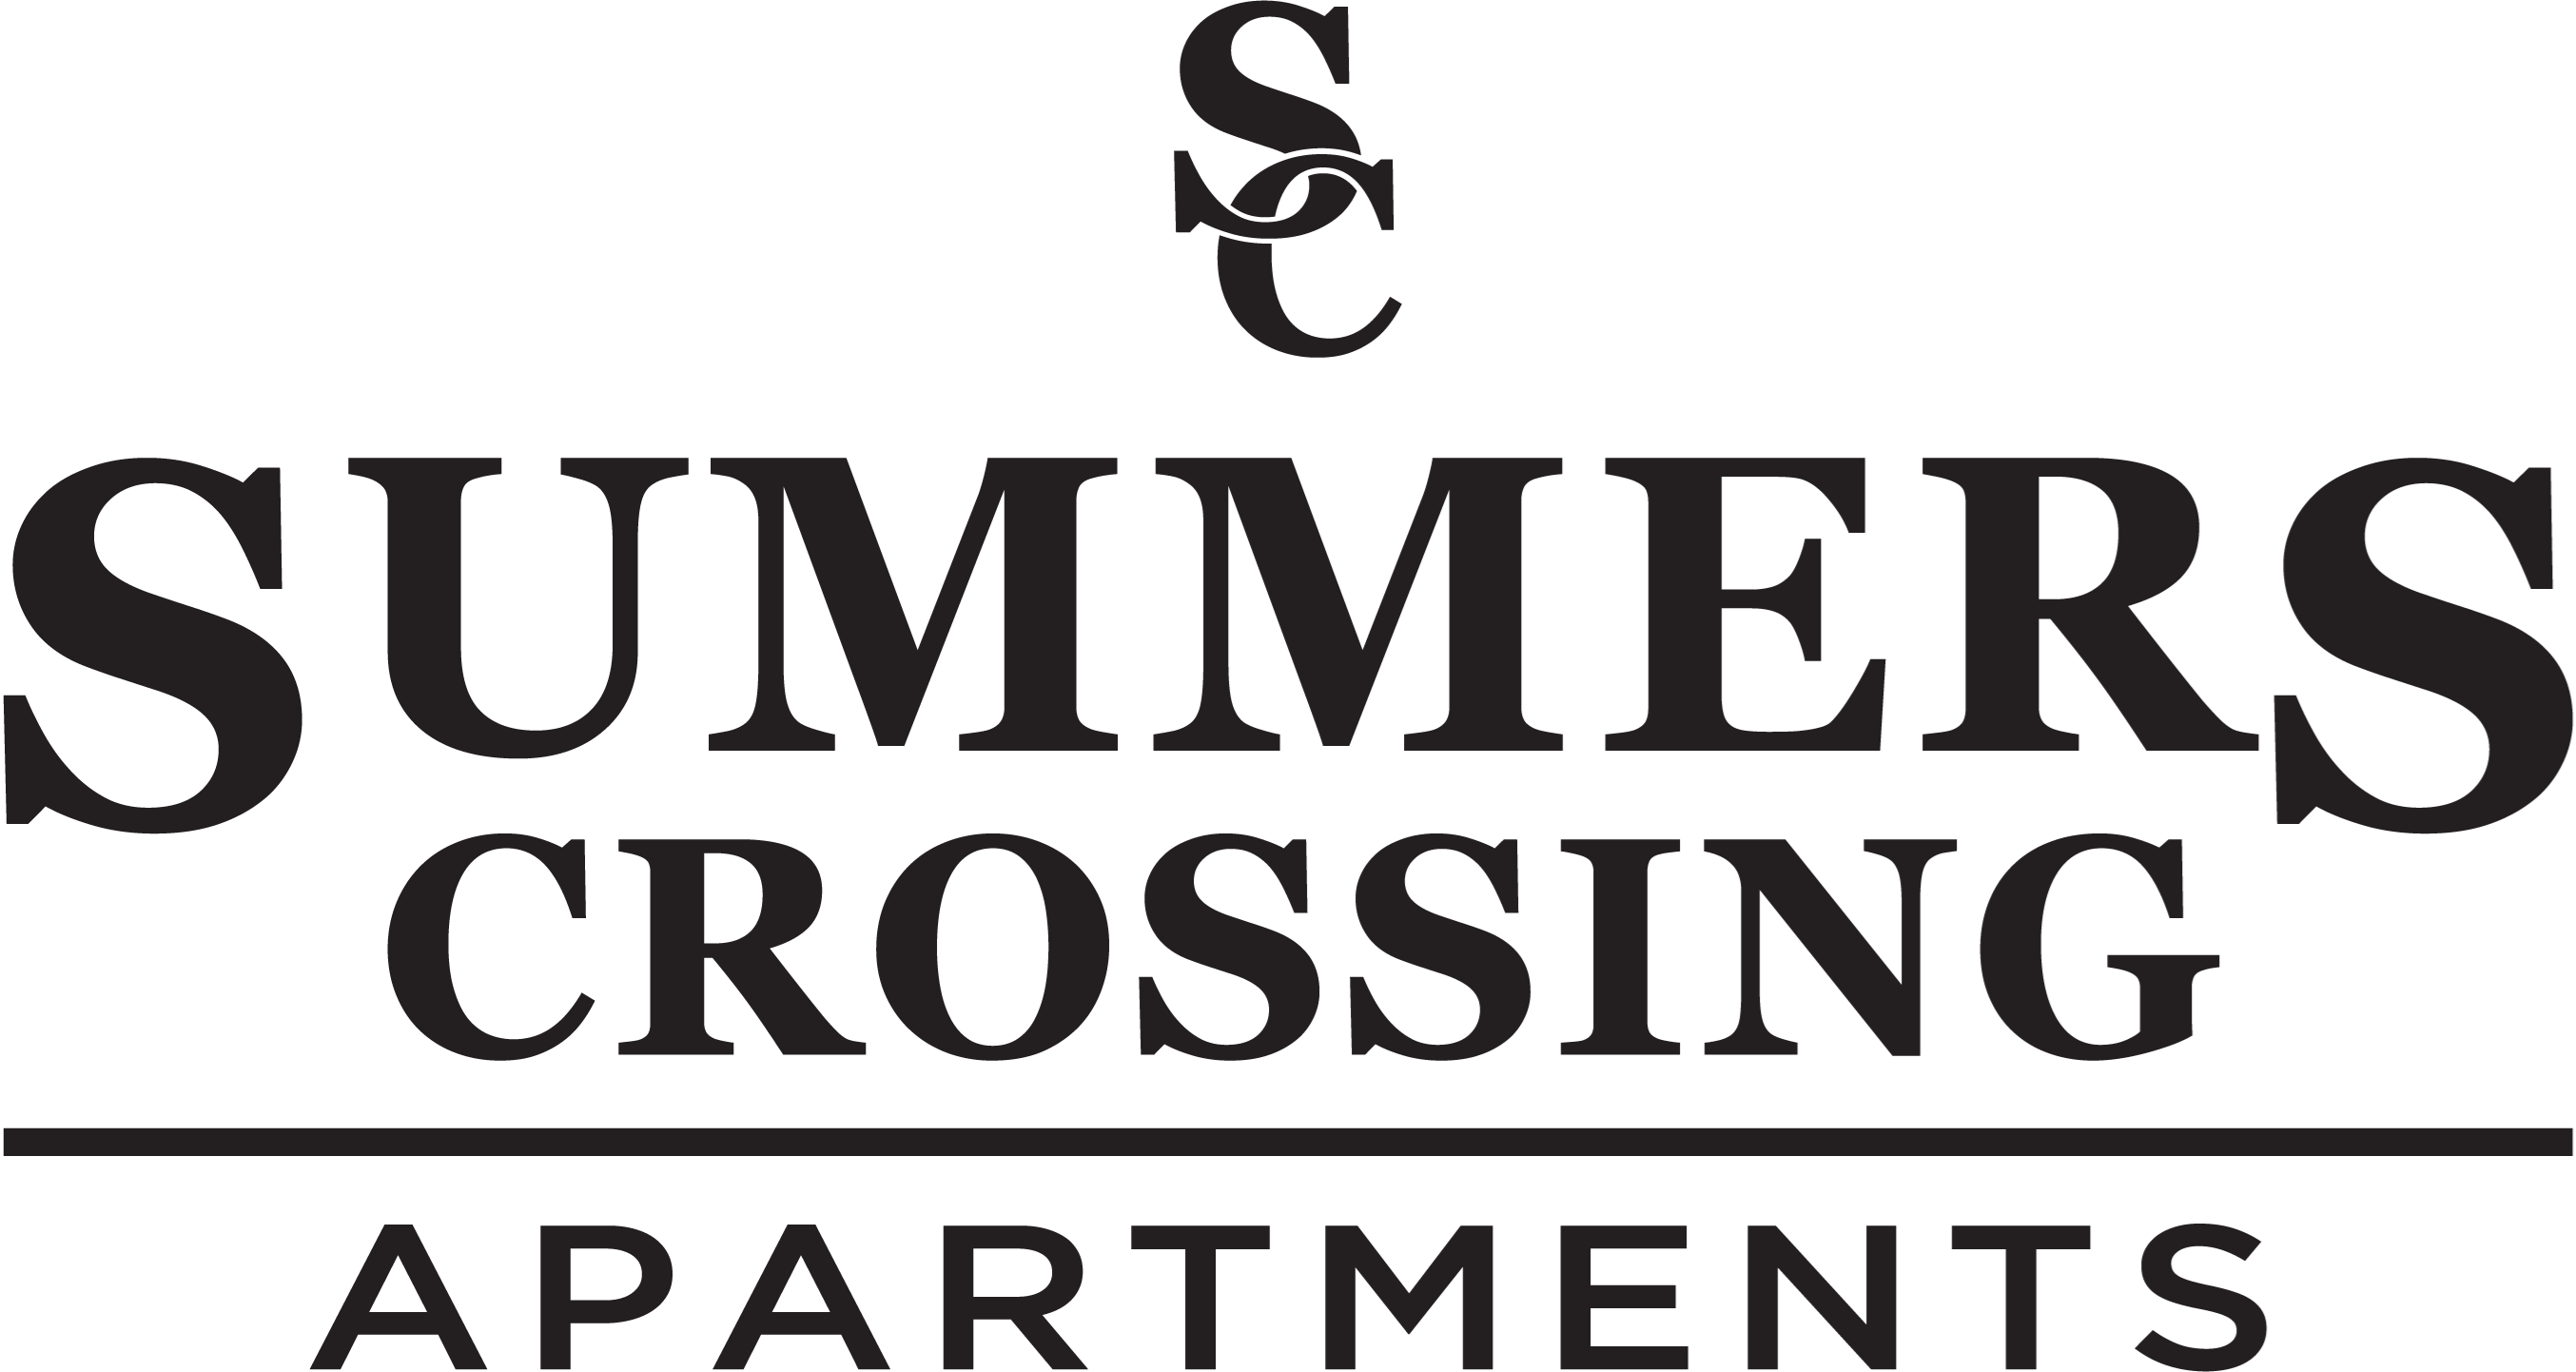 Business logo of Summers Crossing Apartments